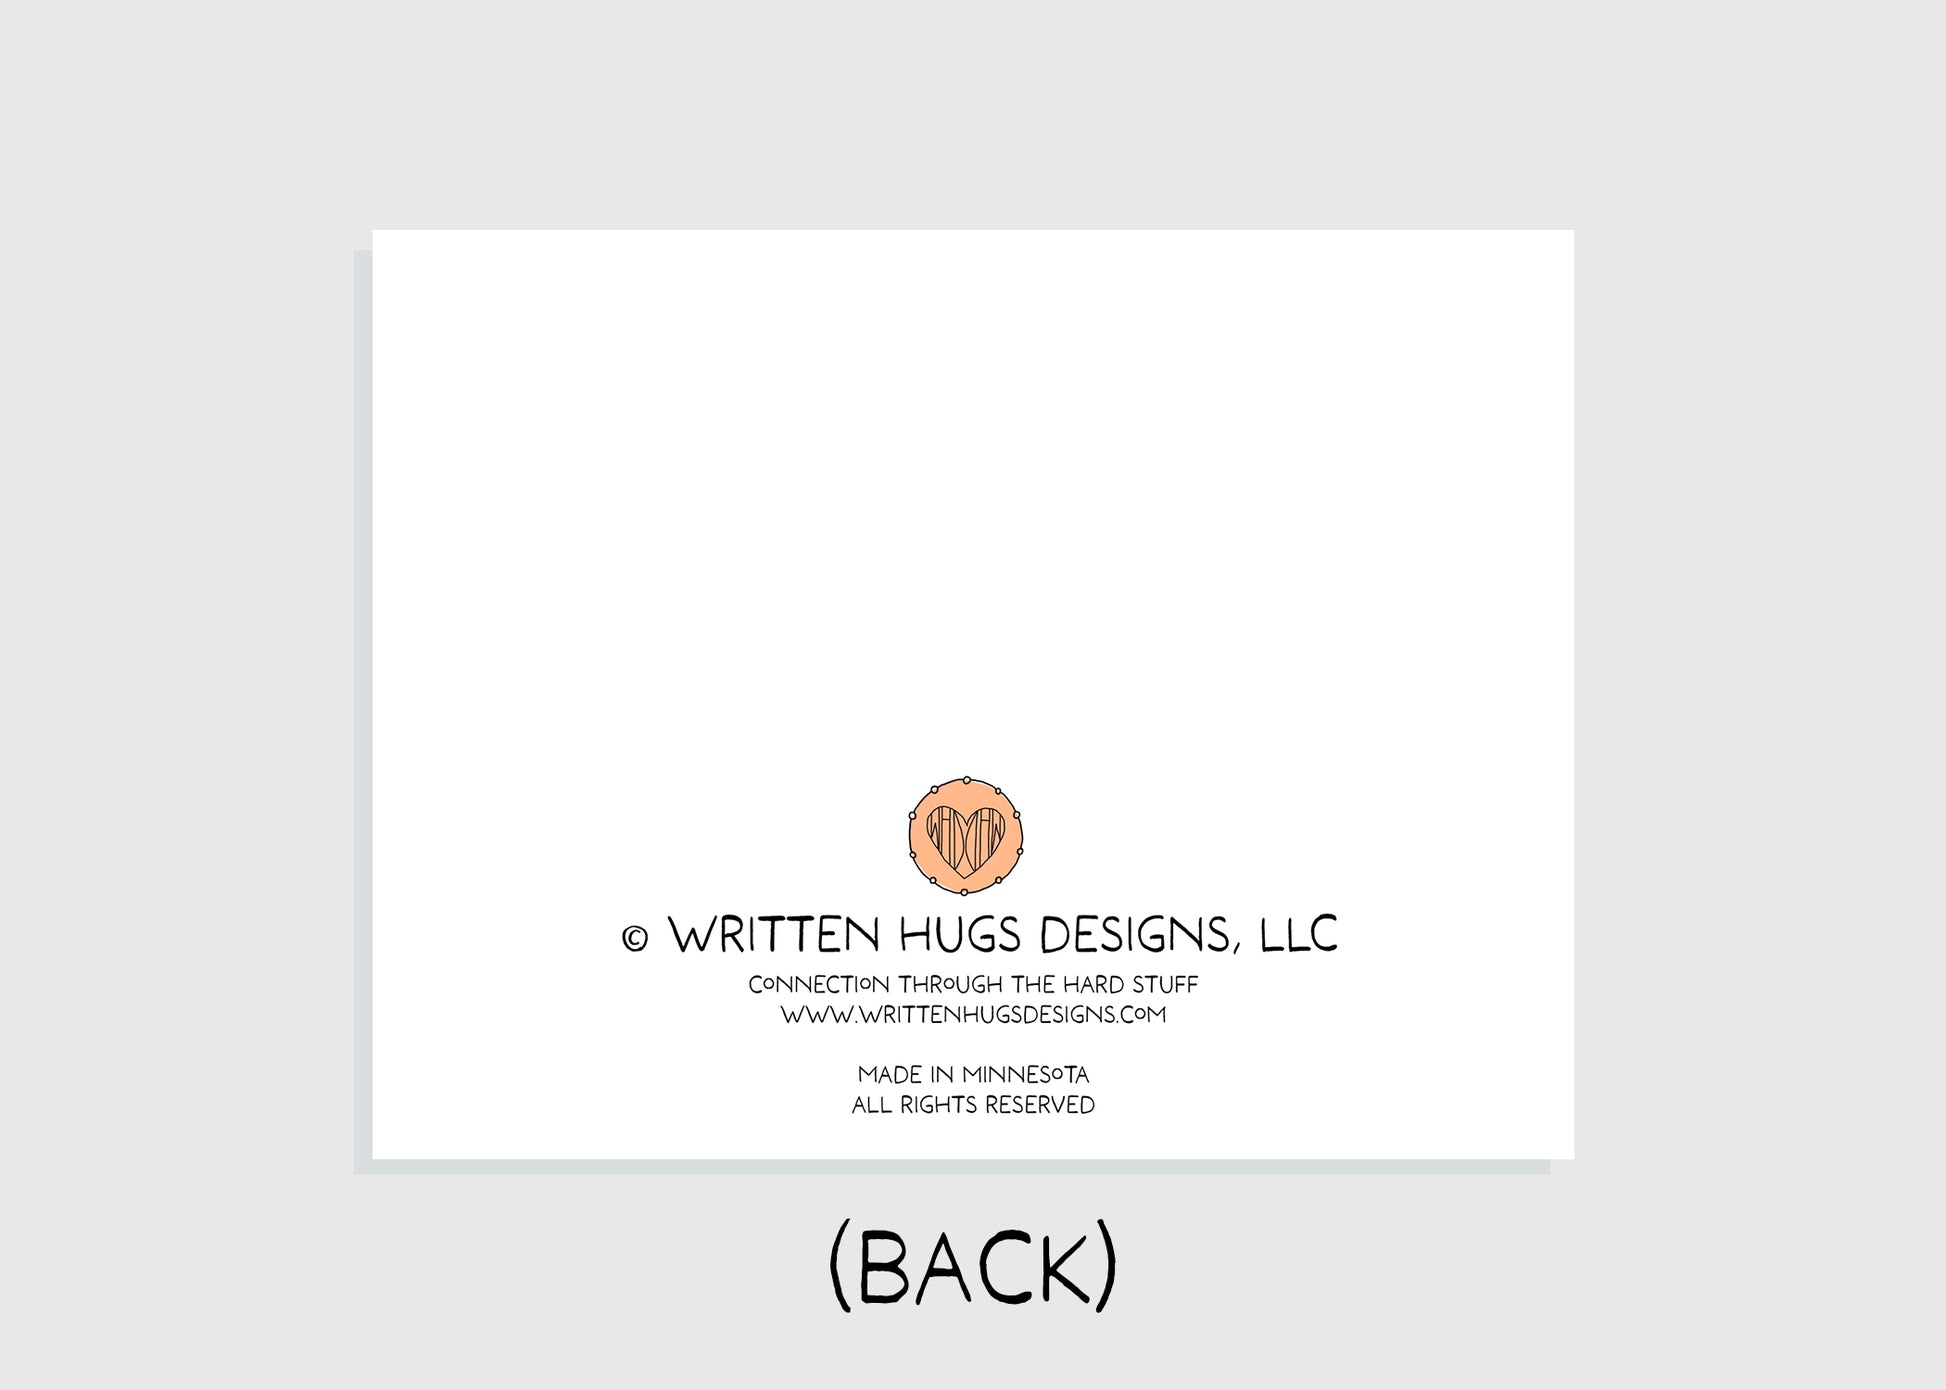 Back of card with Written Hugs Designs logo